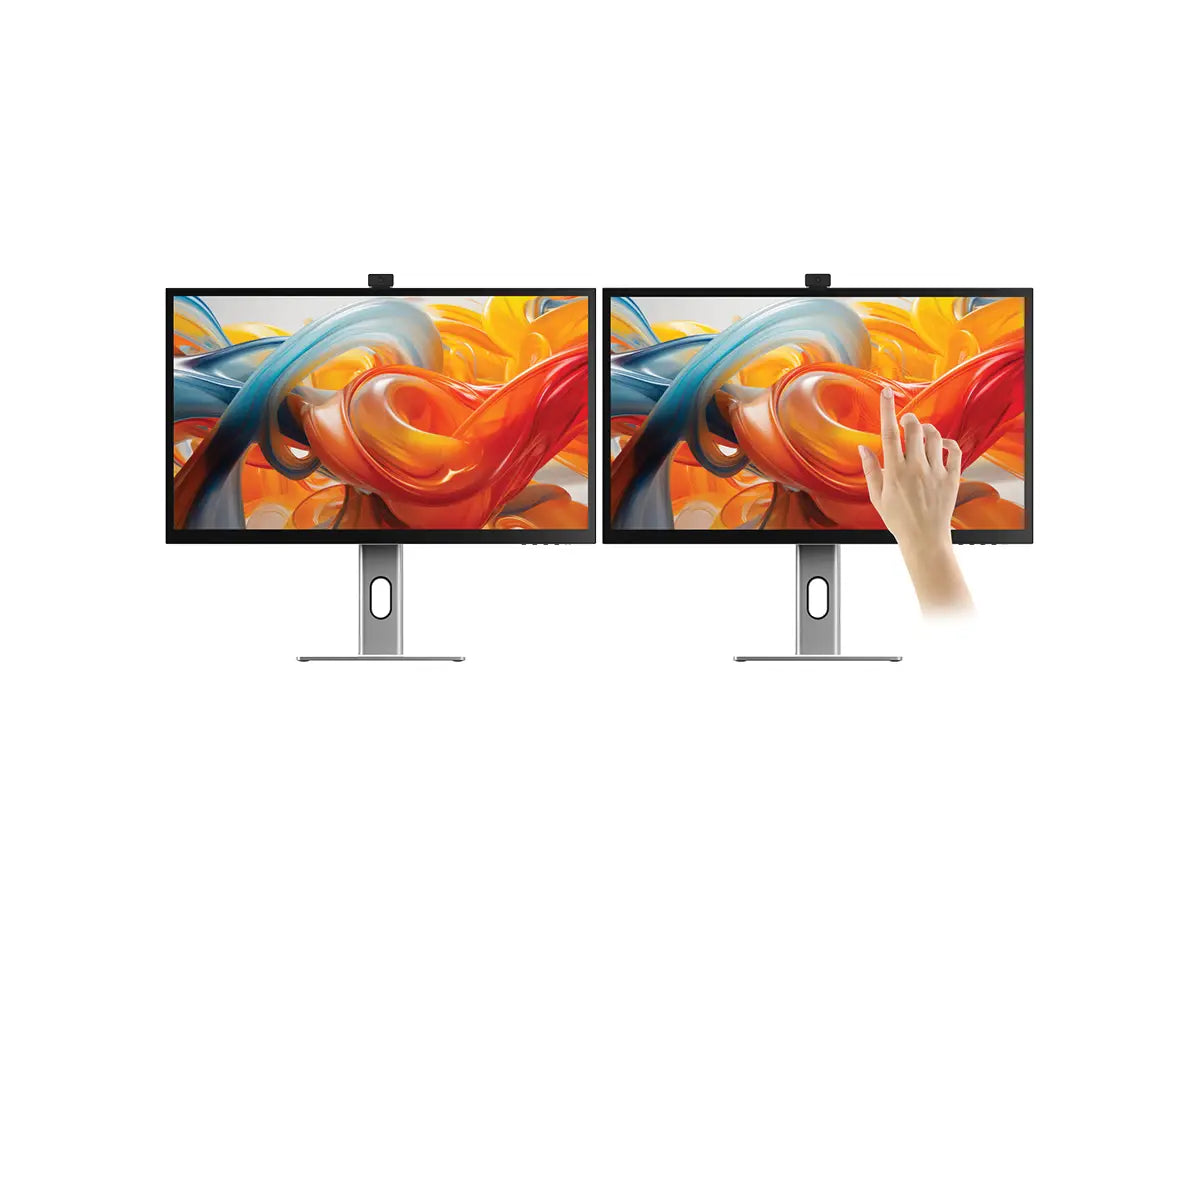 clarity-pro-touch-27-uhd-4k-monitor-with-65w-pd-webcam-and-touchscreen-pack-of-2_1